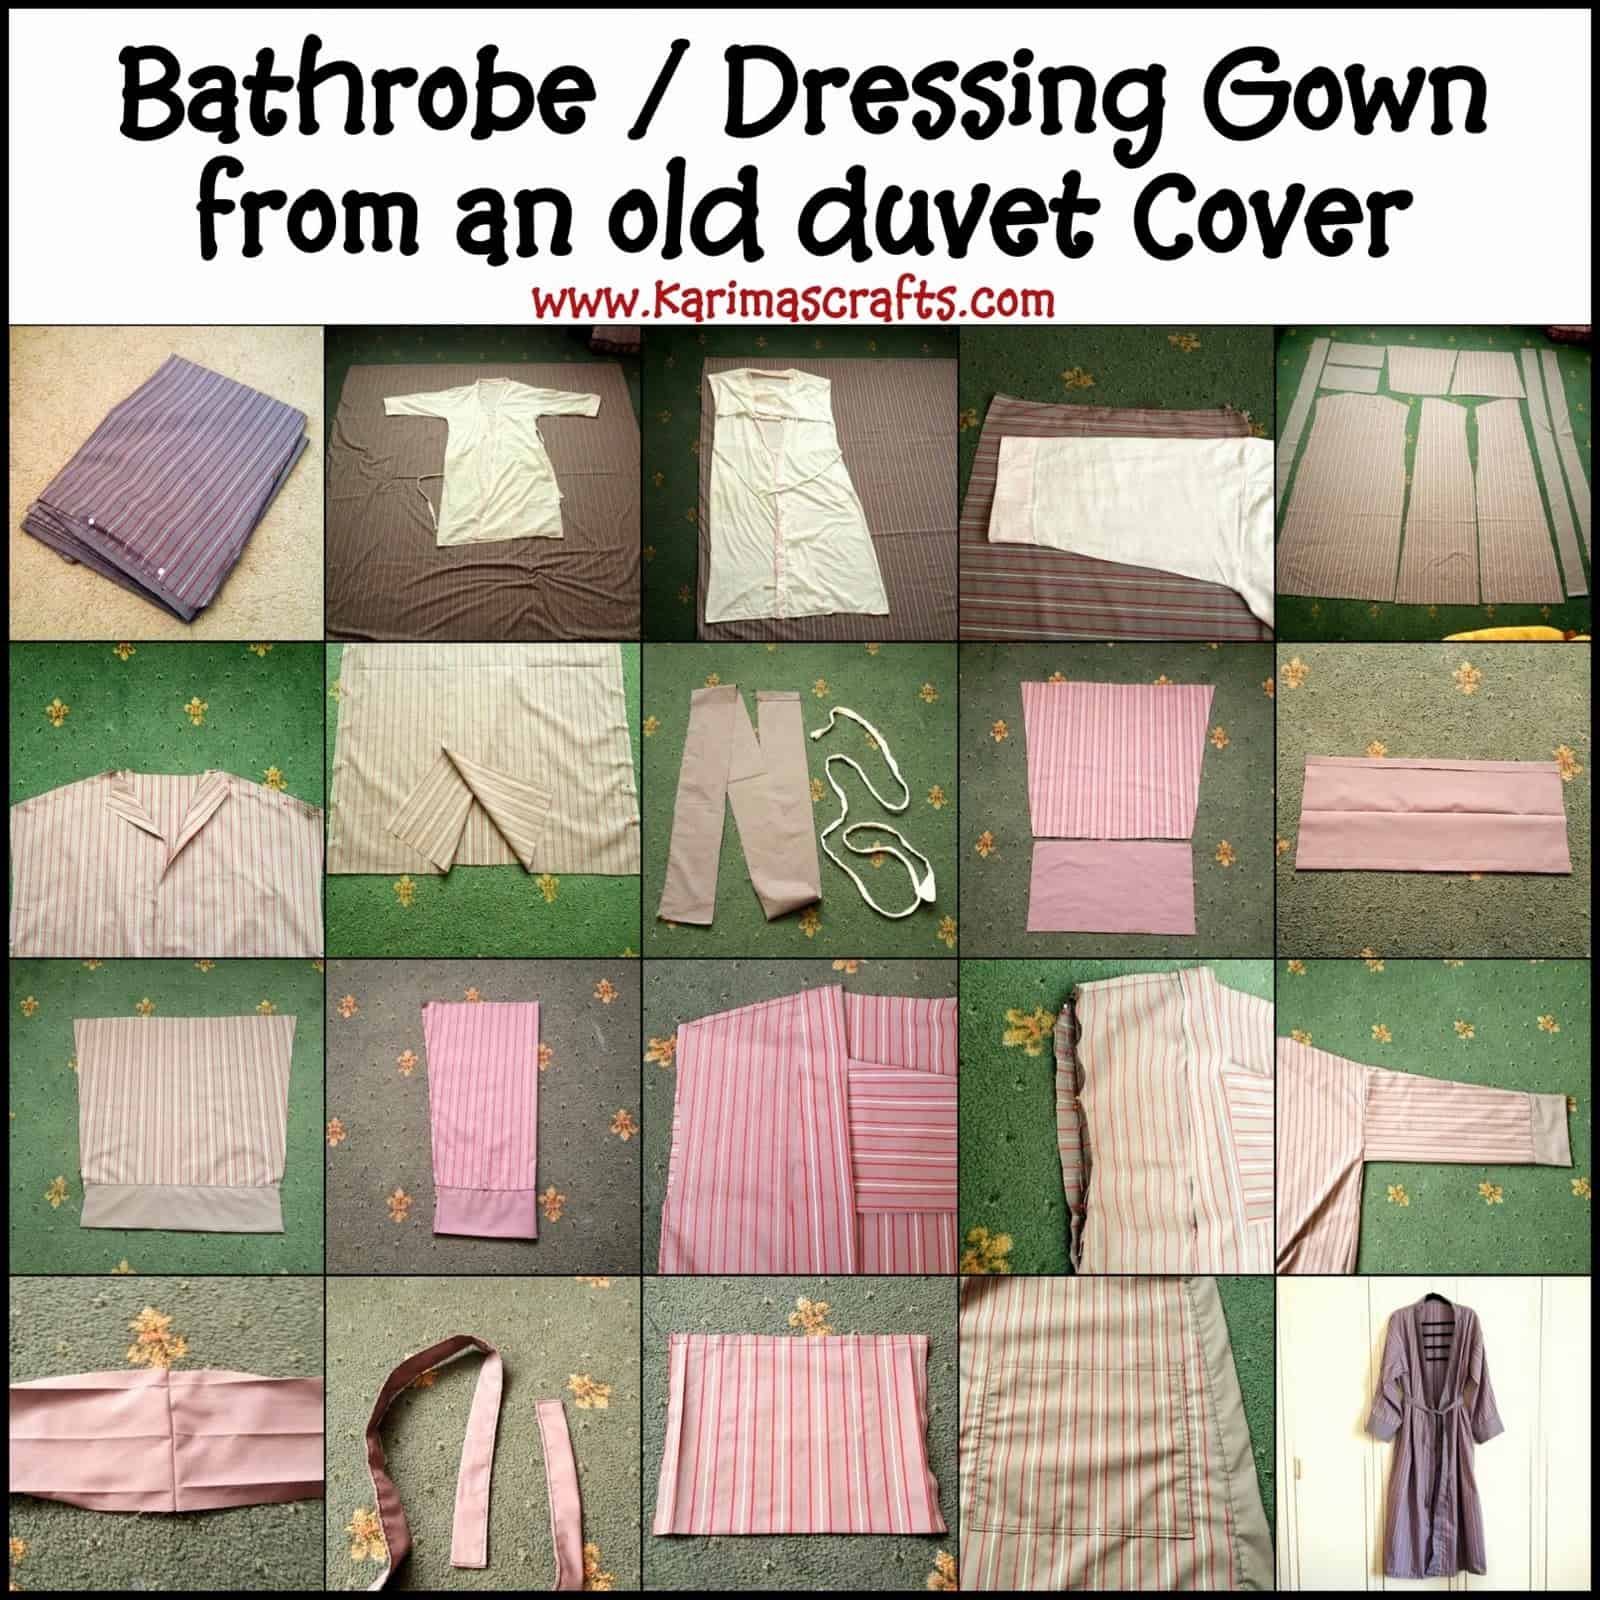 Dressing gown from an old duvet cover